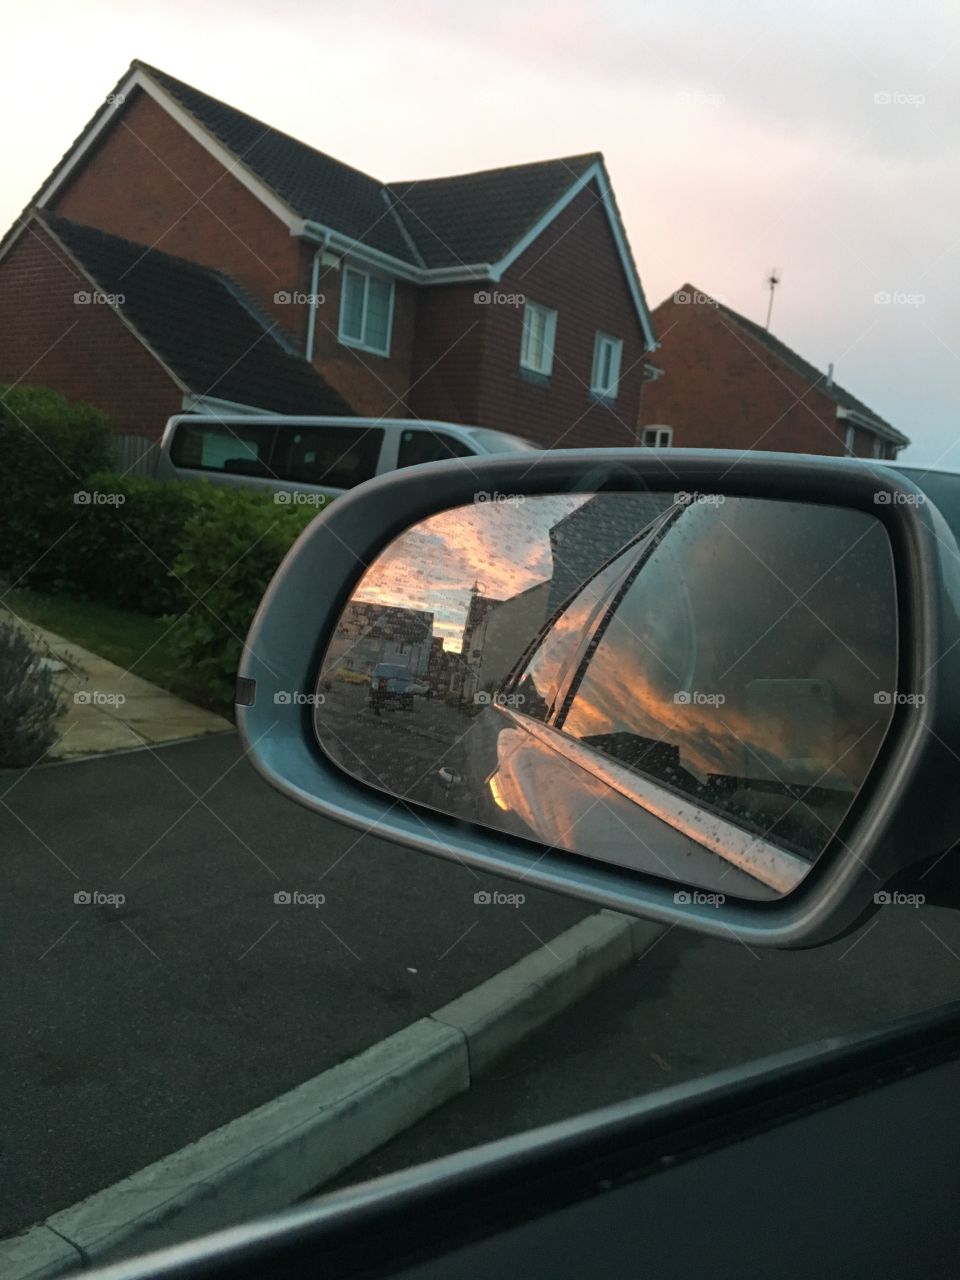 A beautiful reflection of the sunrise in a car wing mirror taken in Kent. Would look stunning in a frame or on a canvas